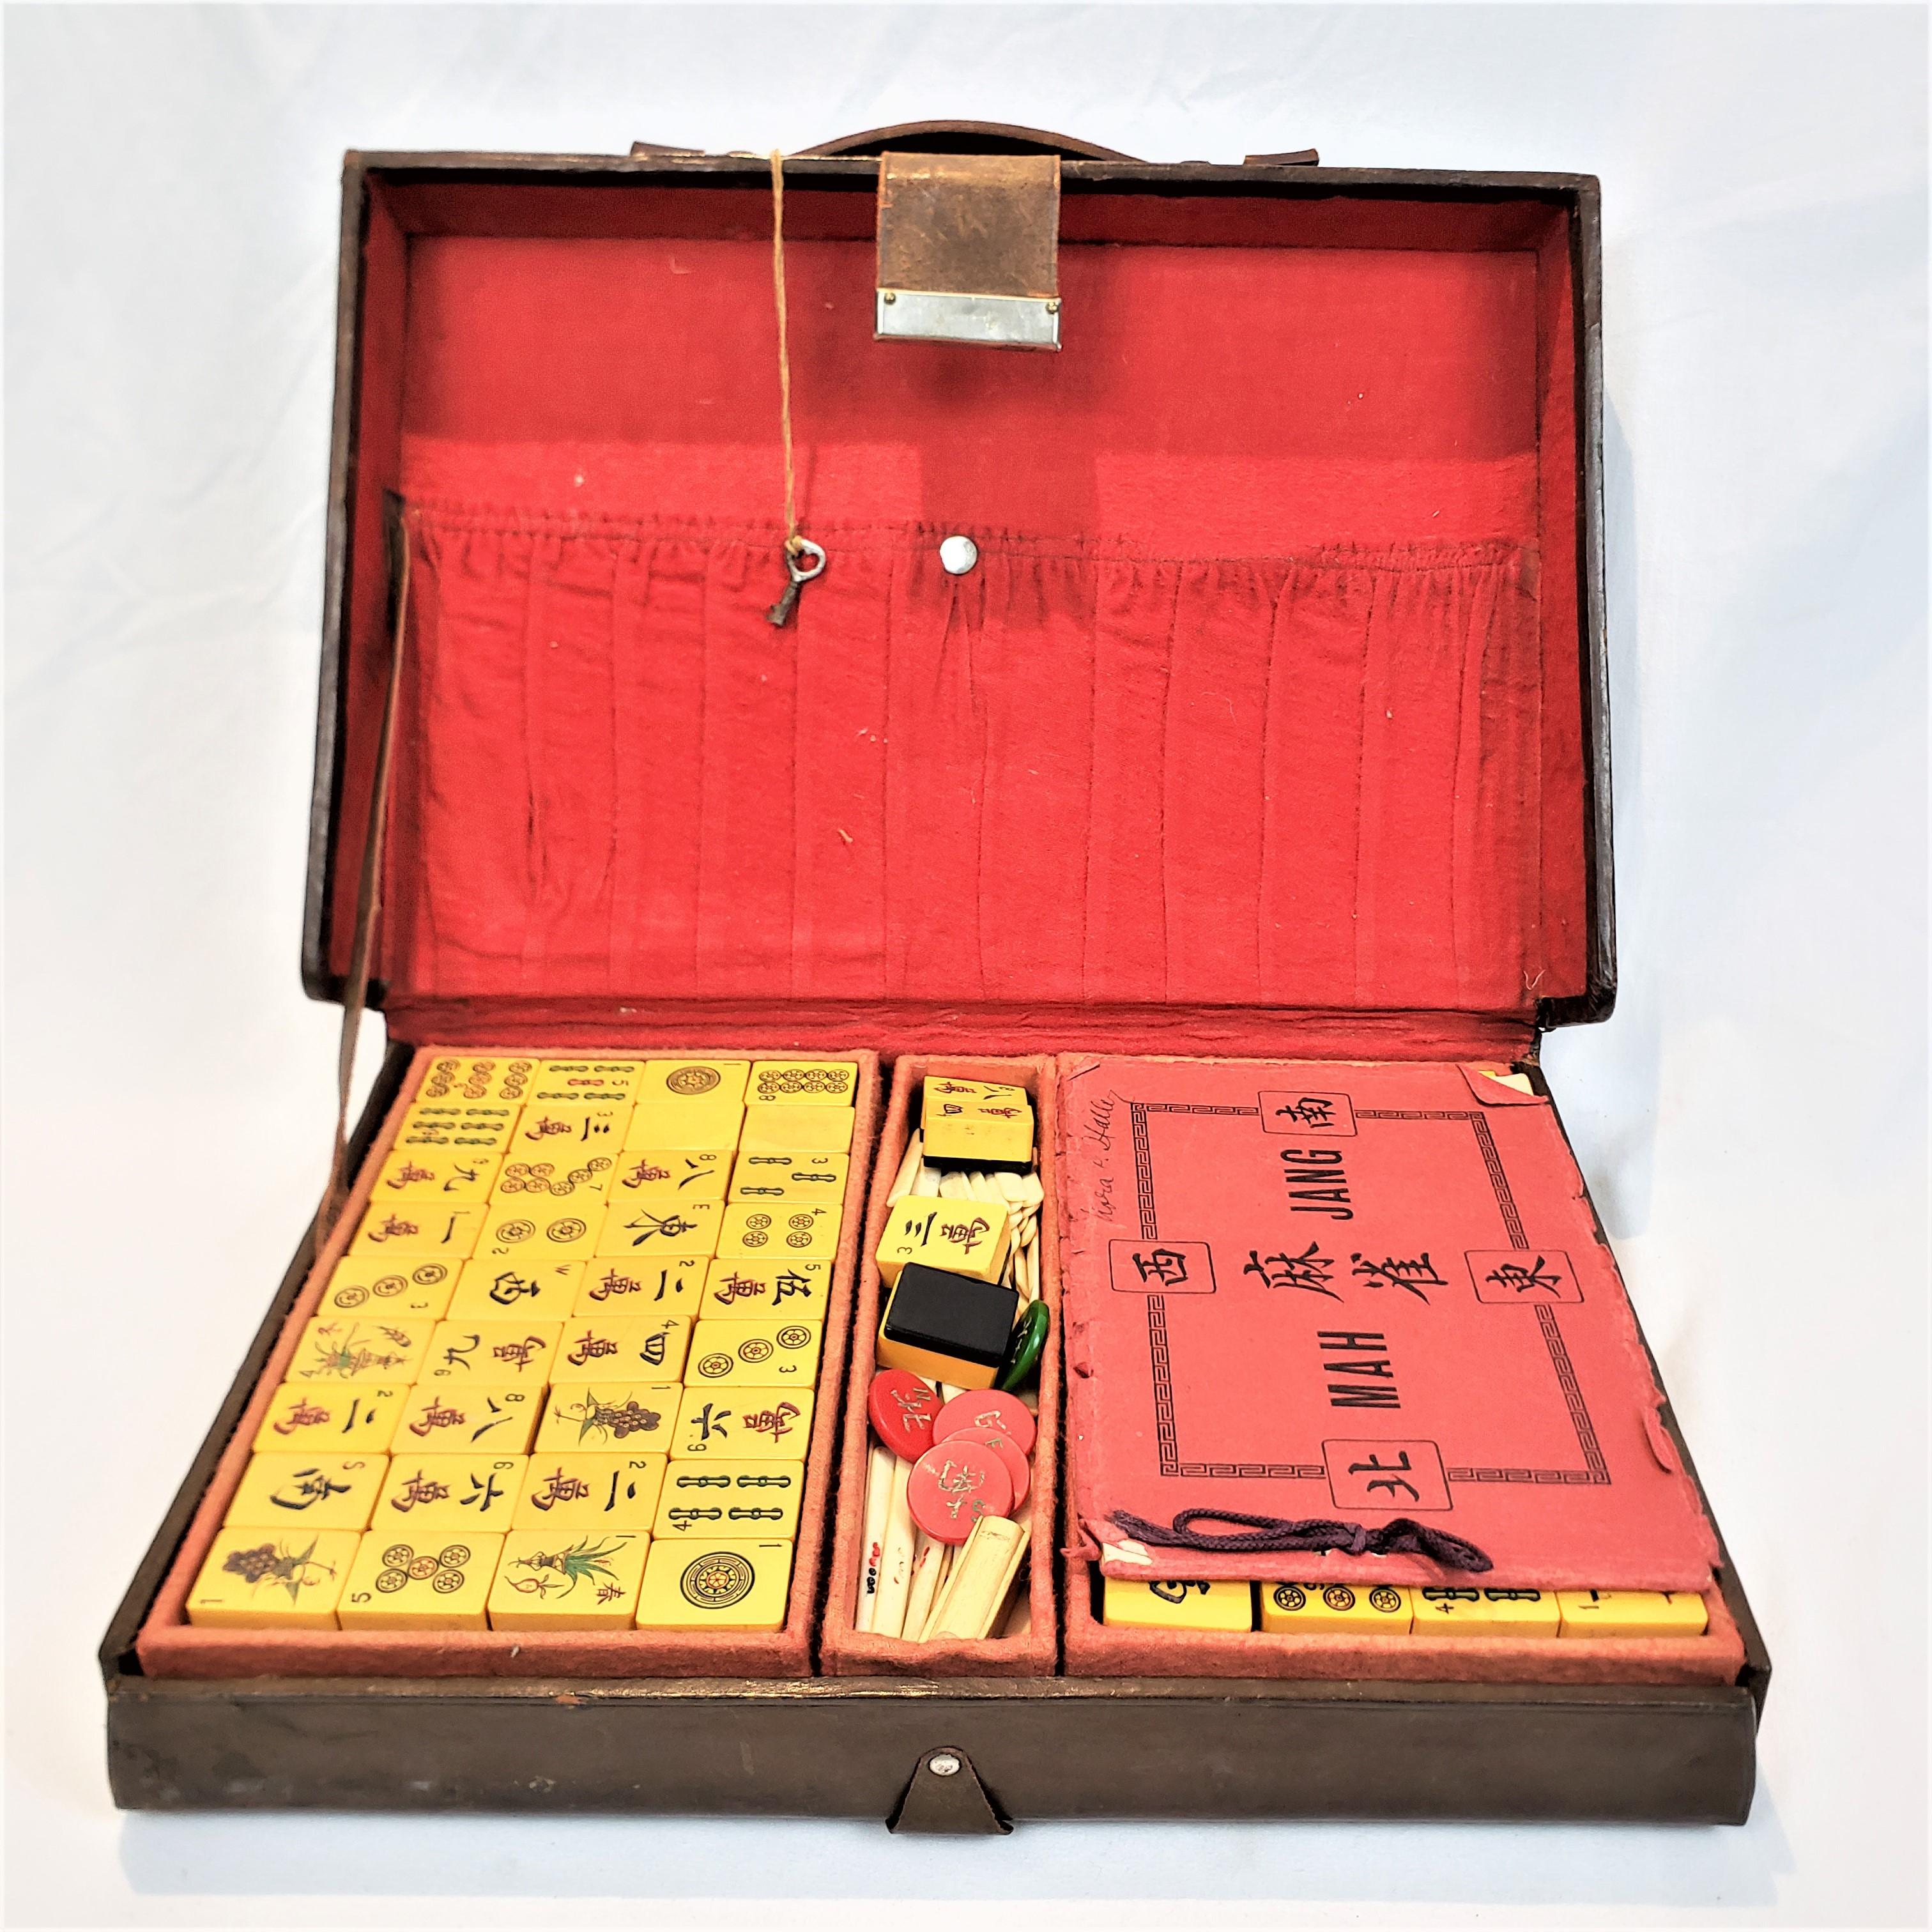 This antique Mahjong set is presumed to have originated from China and date to approximately 1900 and done in the Chinese Export style. The tiles are composed of a butterscotch bakelite and some with black backs, with etched and hand painted